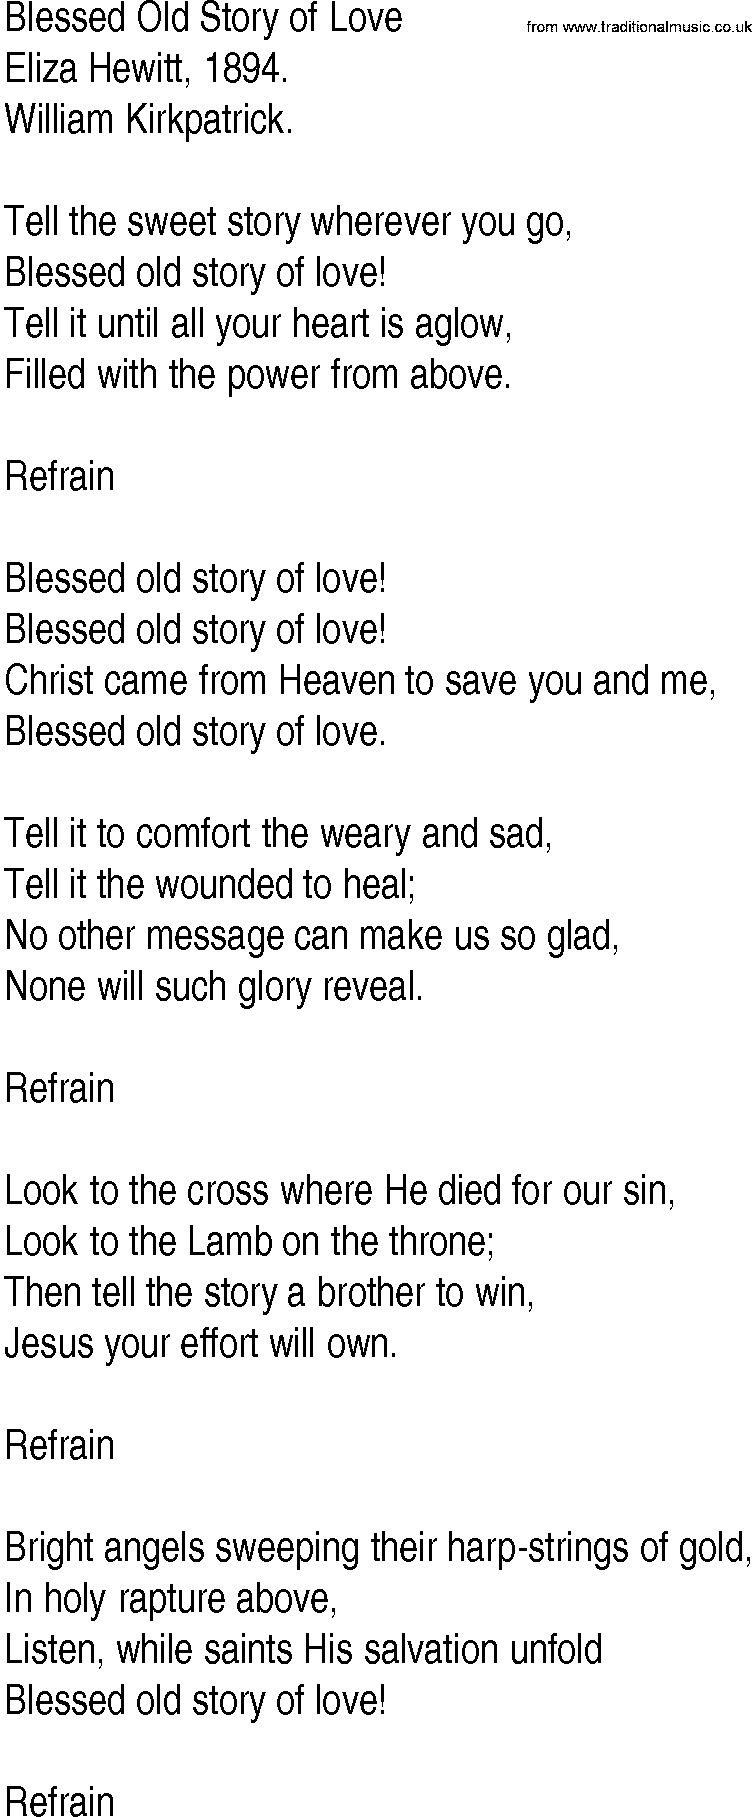 Hymn and Gospel Song: Blessed Old Story of Love by Eliza Hewitt lyrics